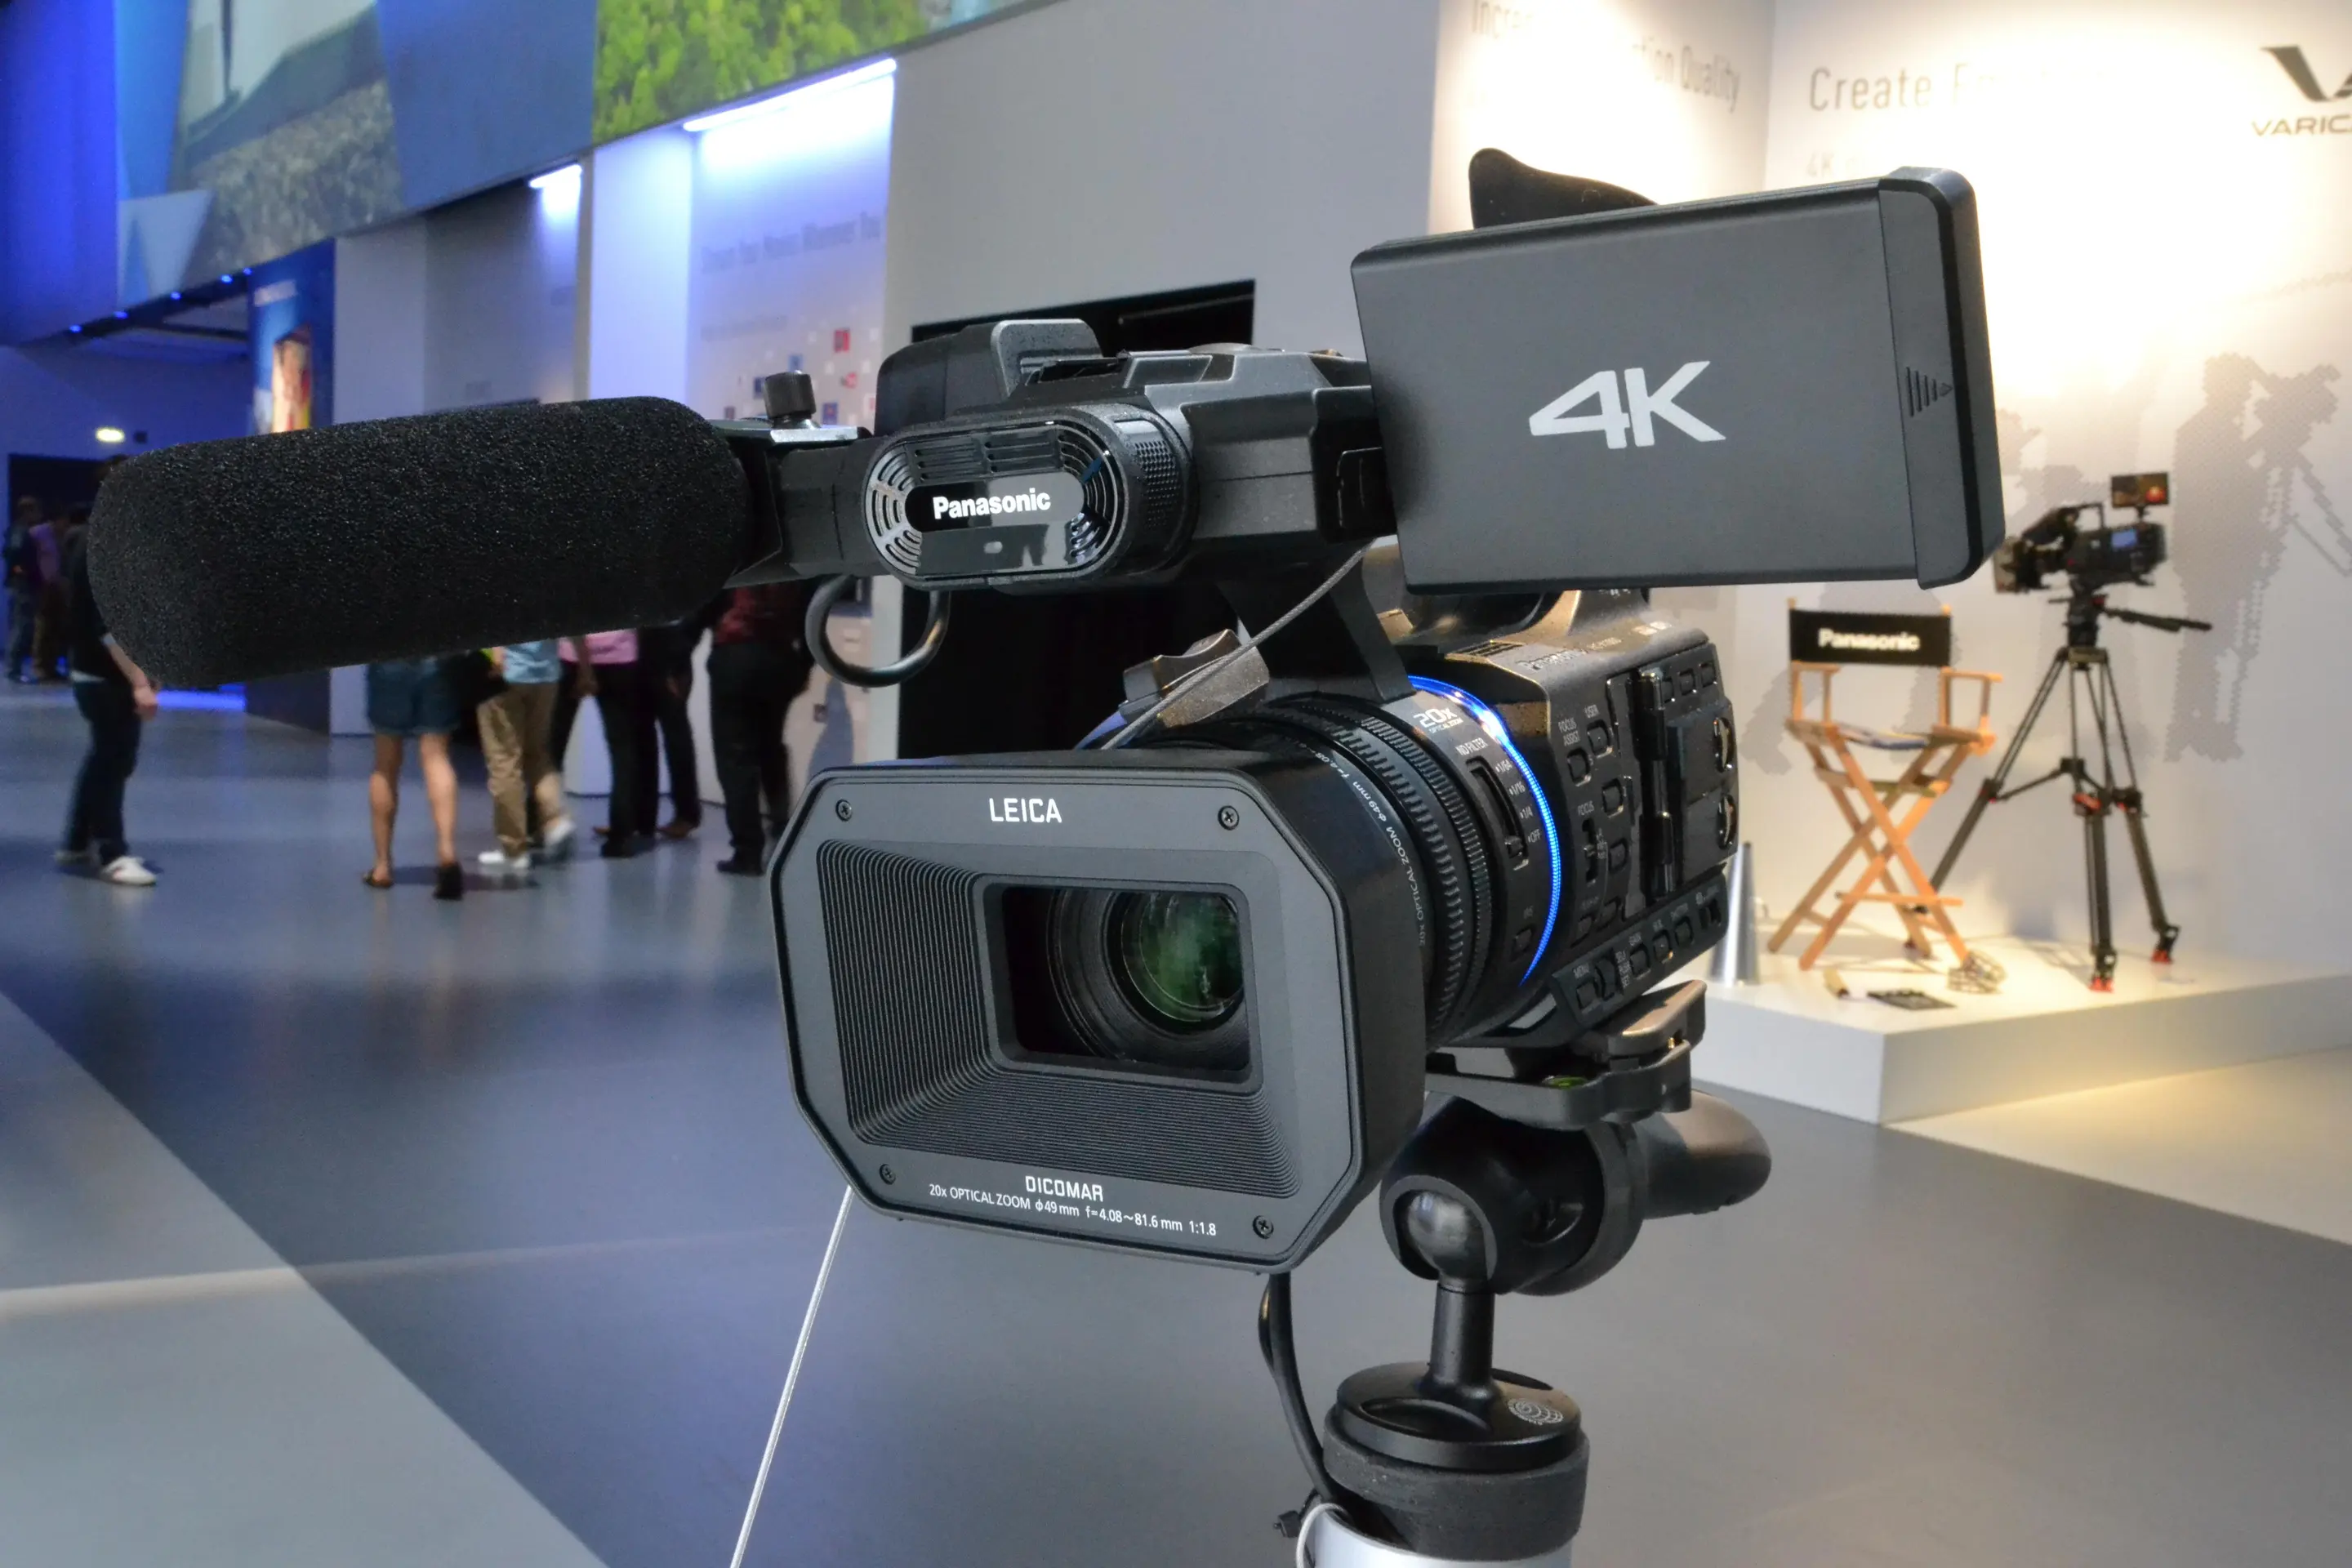 When Did Panasonic Release The HD HC-X1000 4K Camcorder In The USA